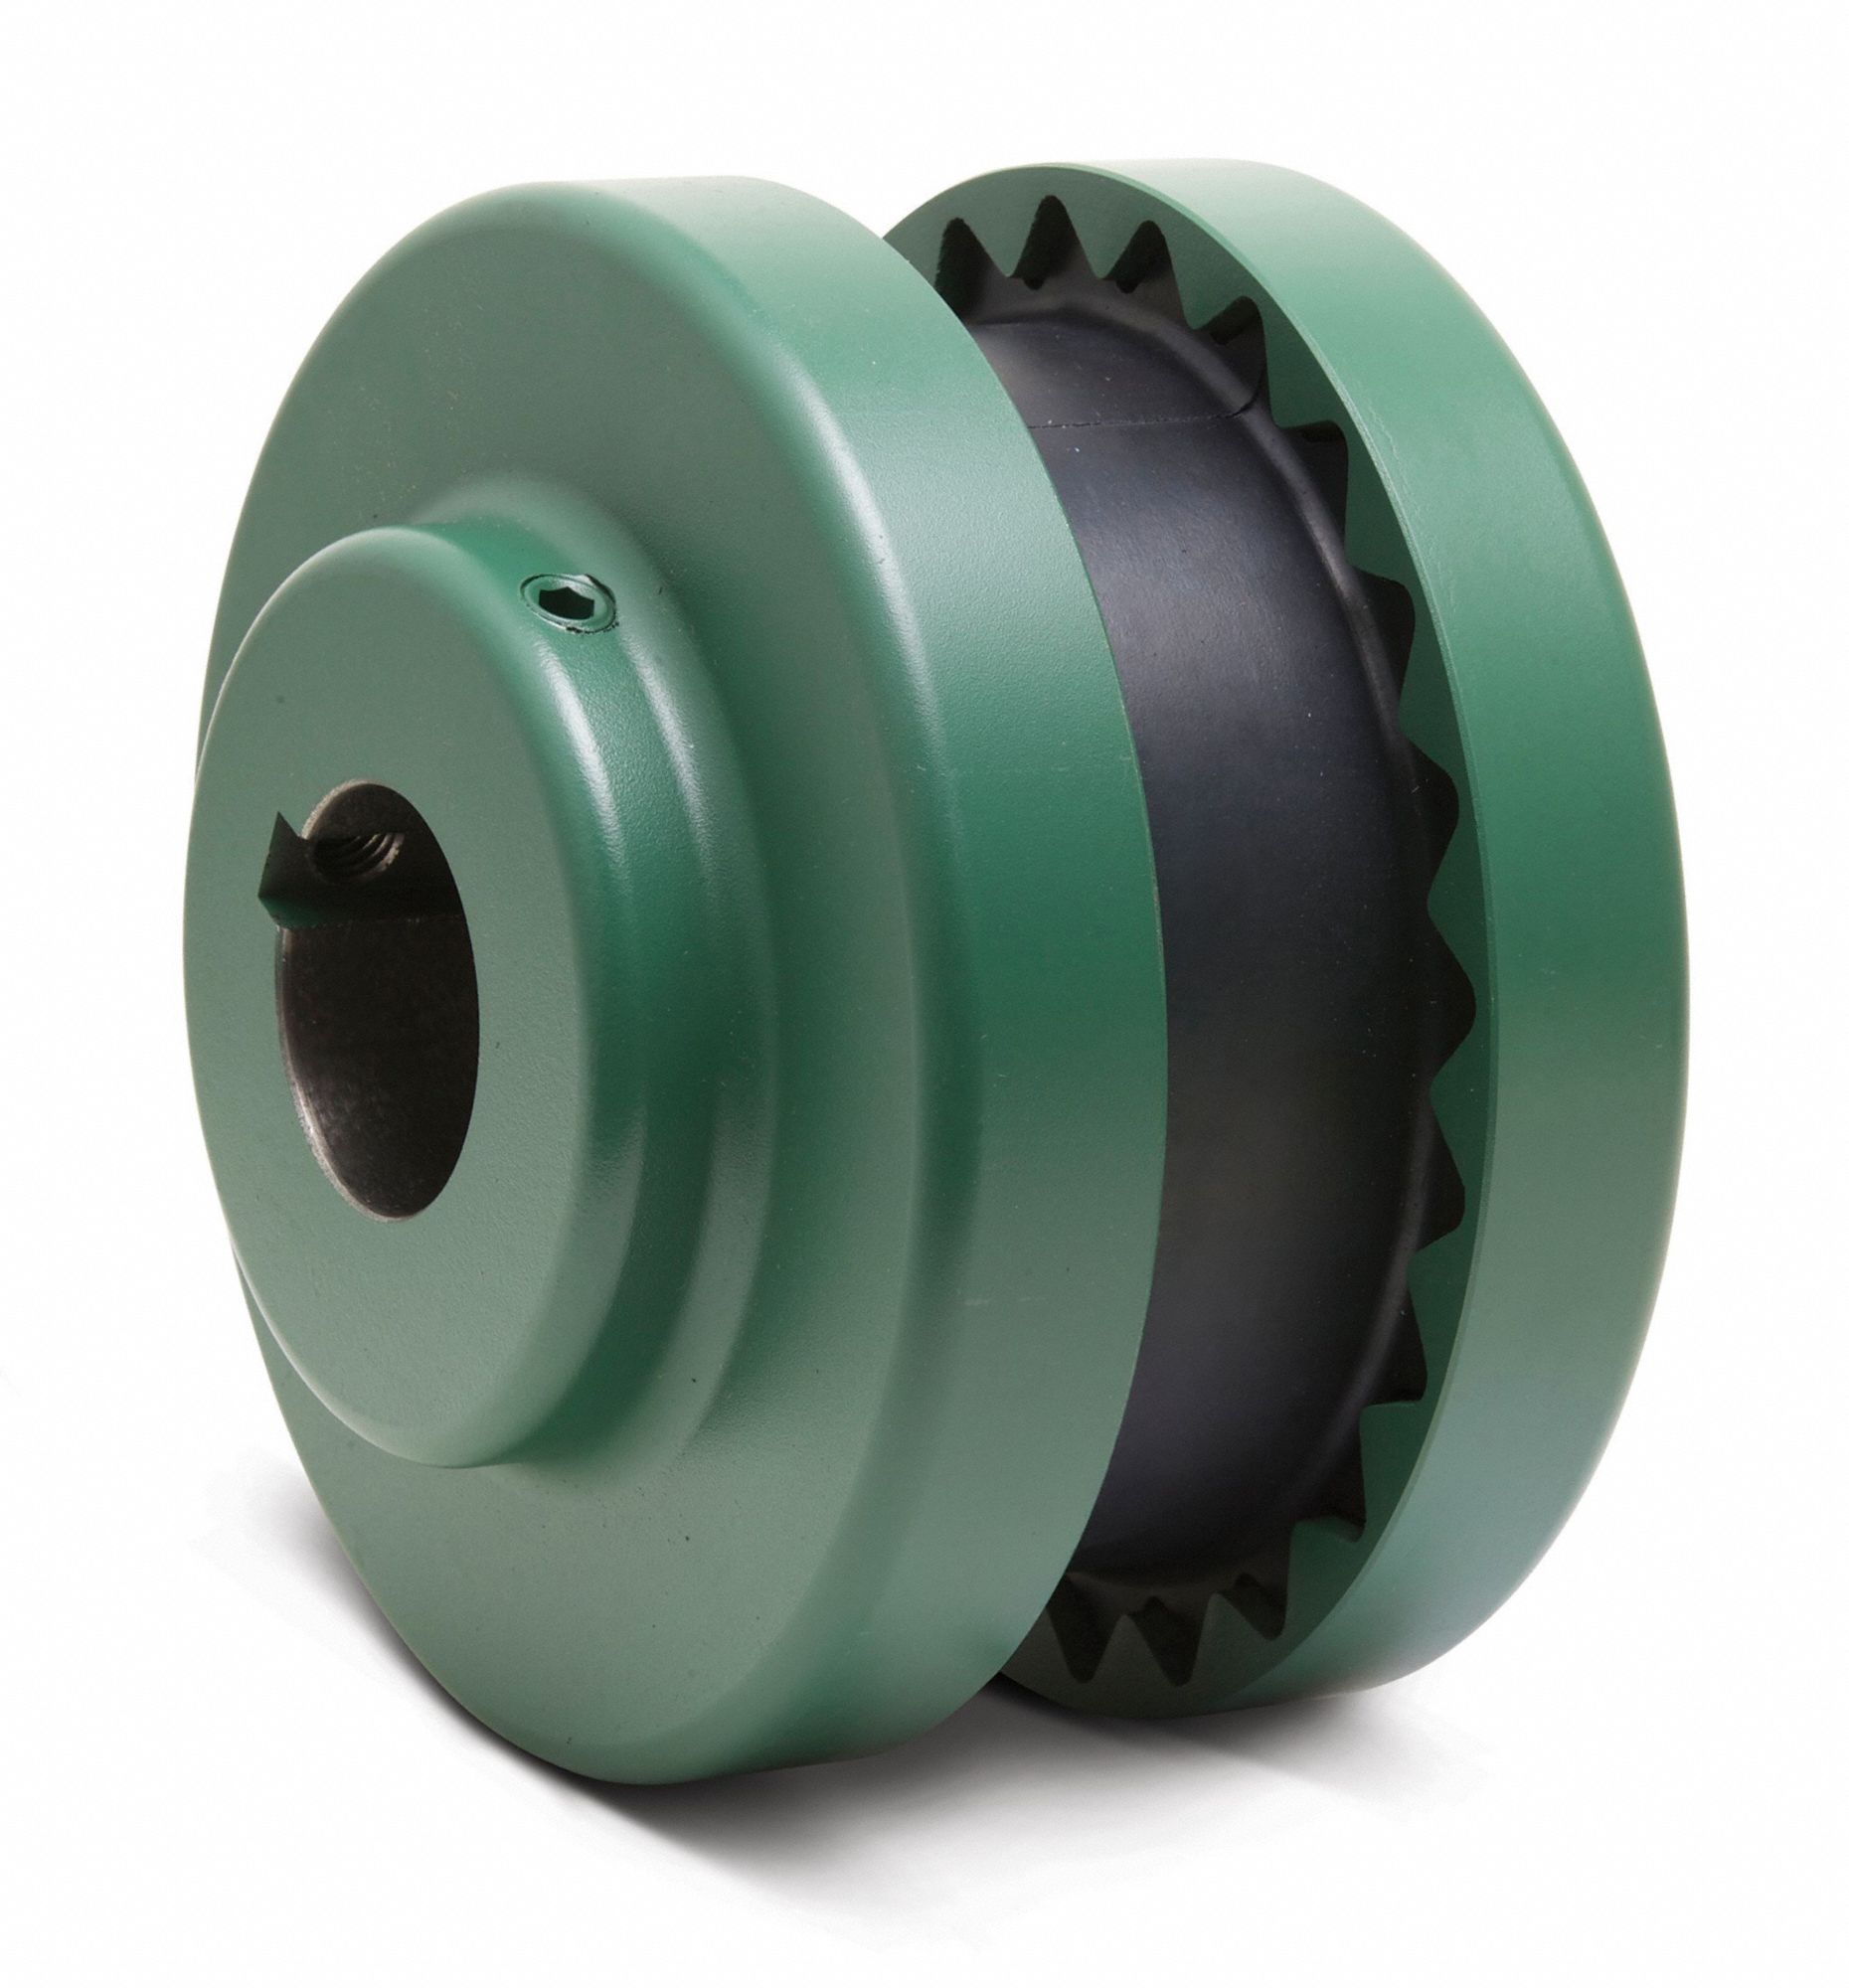 Details about   TB Woods 10S114 No.10 Sure-Flex Sleeve Coupling Flange 1-1/4" Finished Bore 